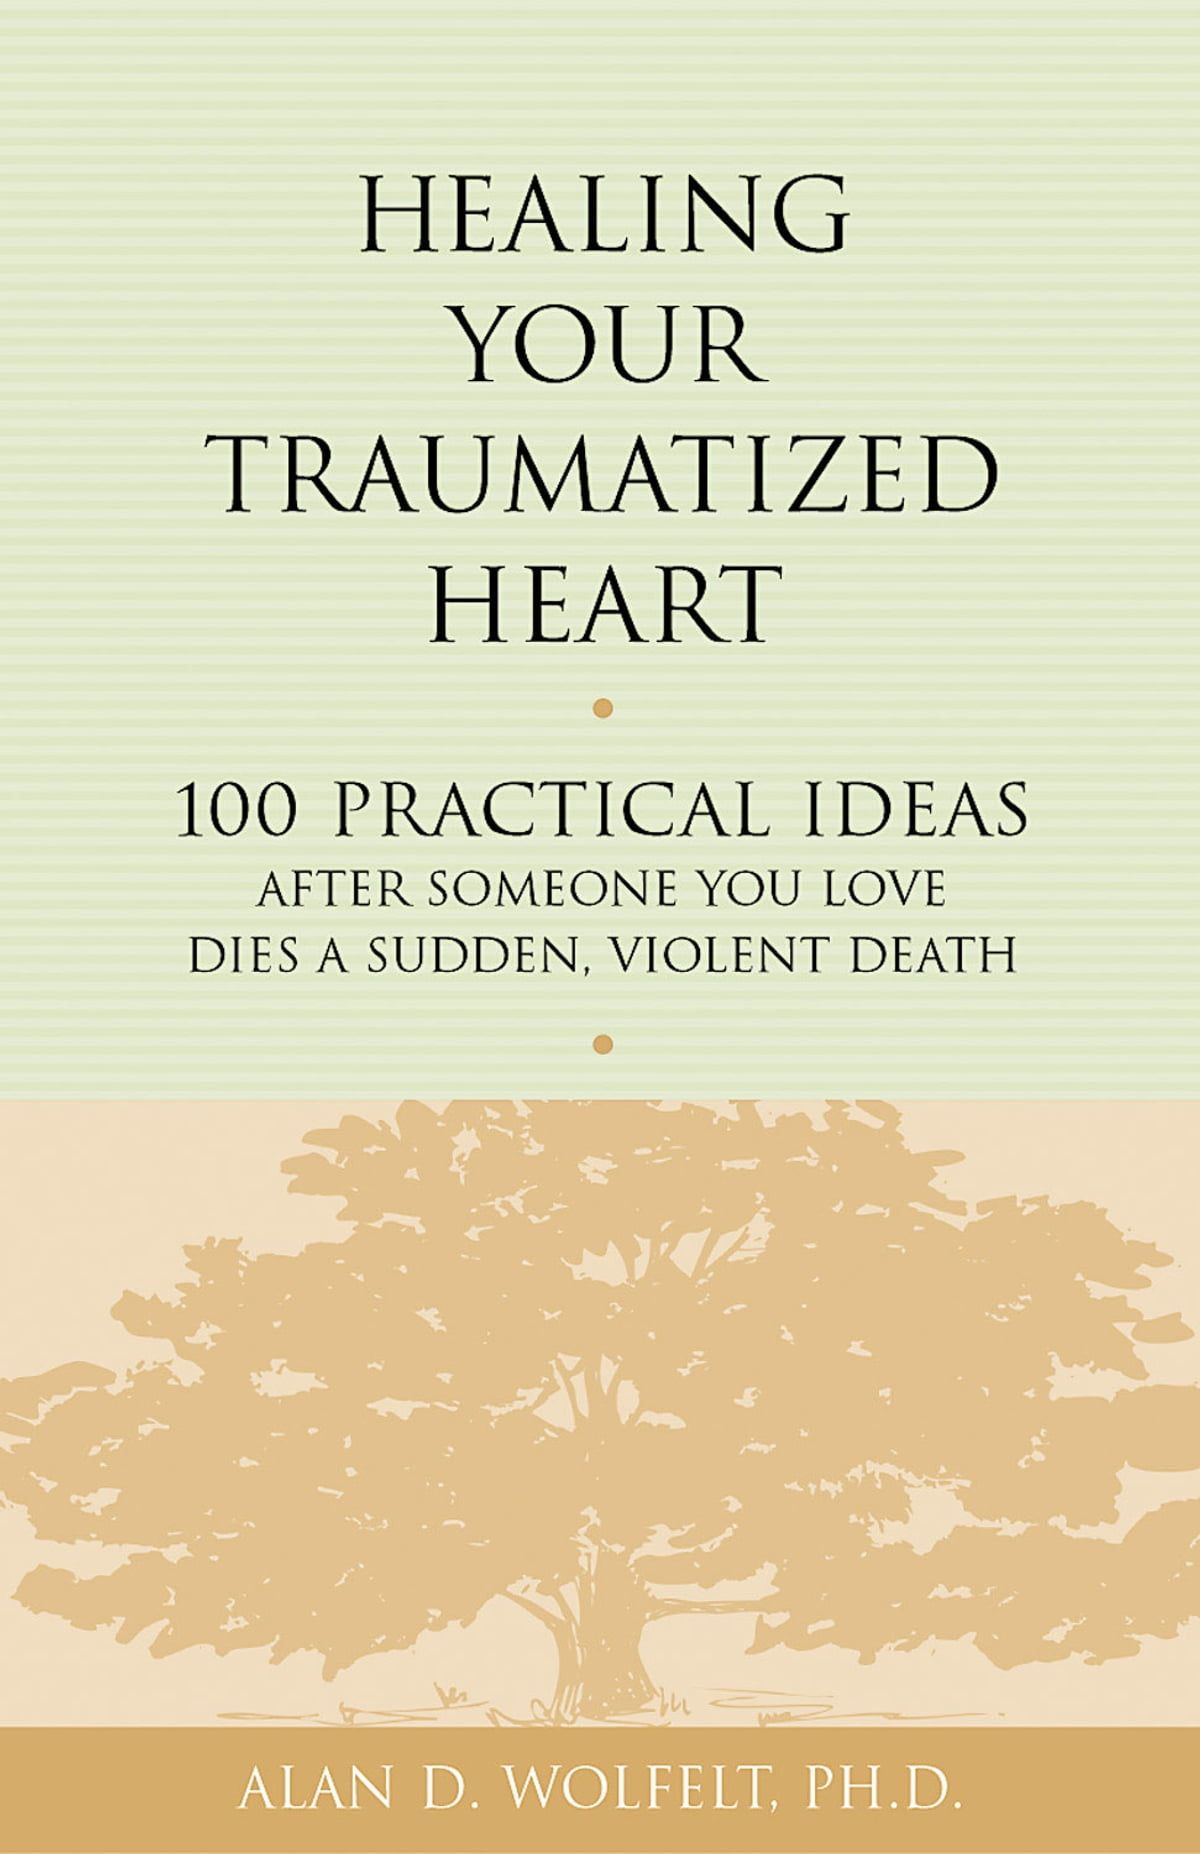 the cover of Healing Your Traumatized Heart